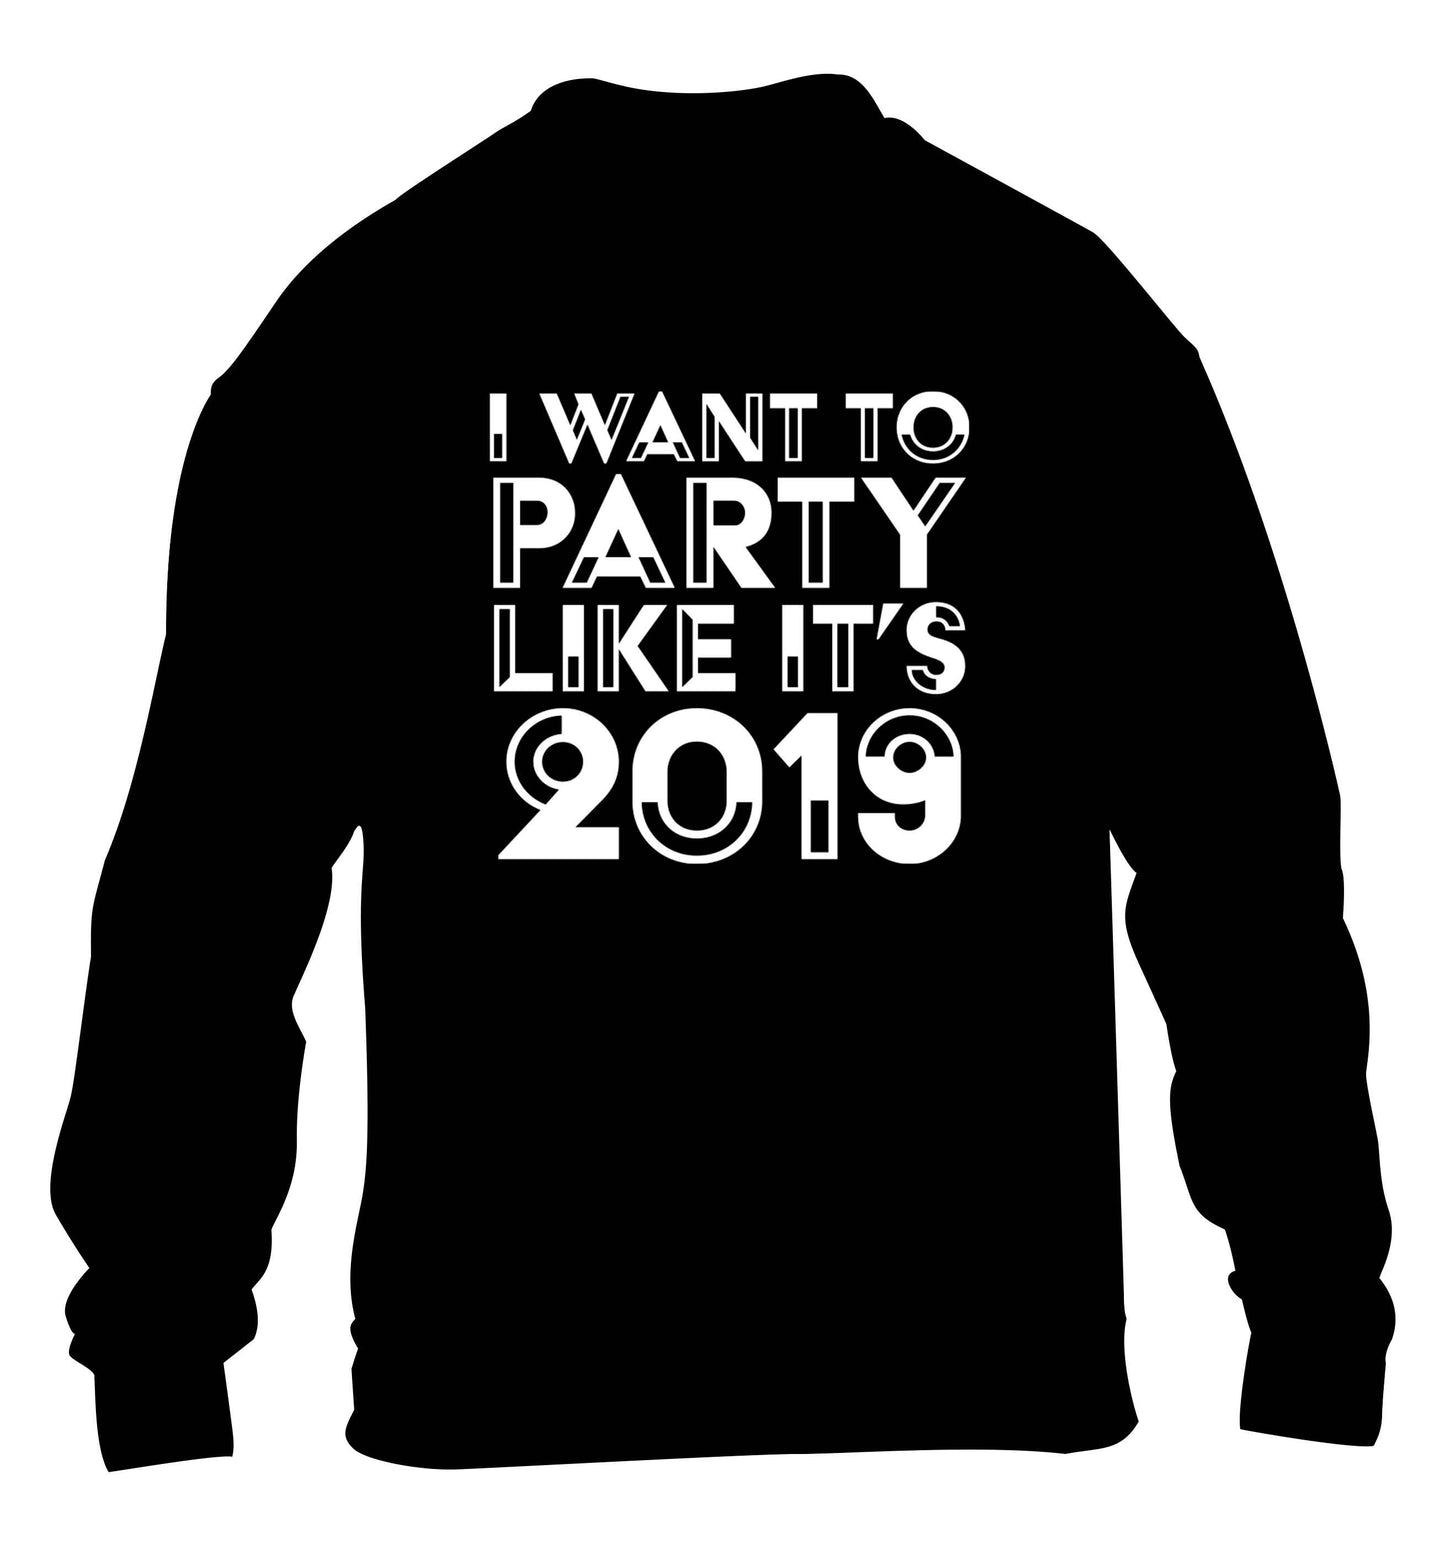 I want to party like it's 2019 children's black sweater 12-13 Years